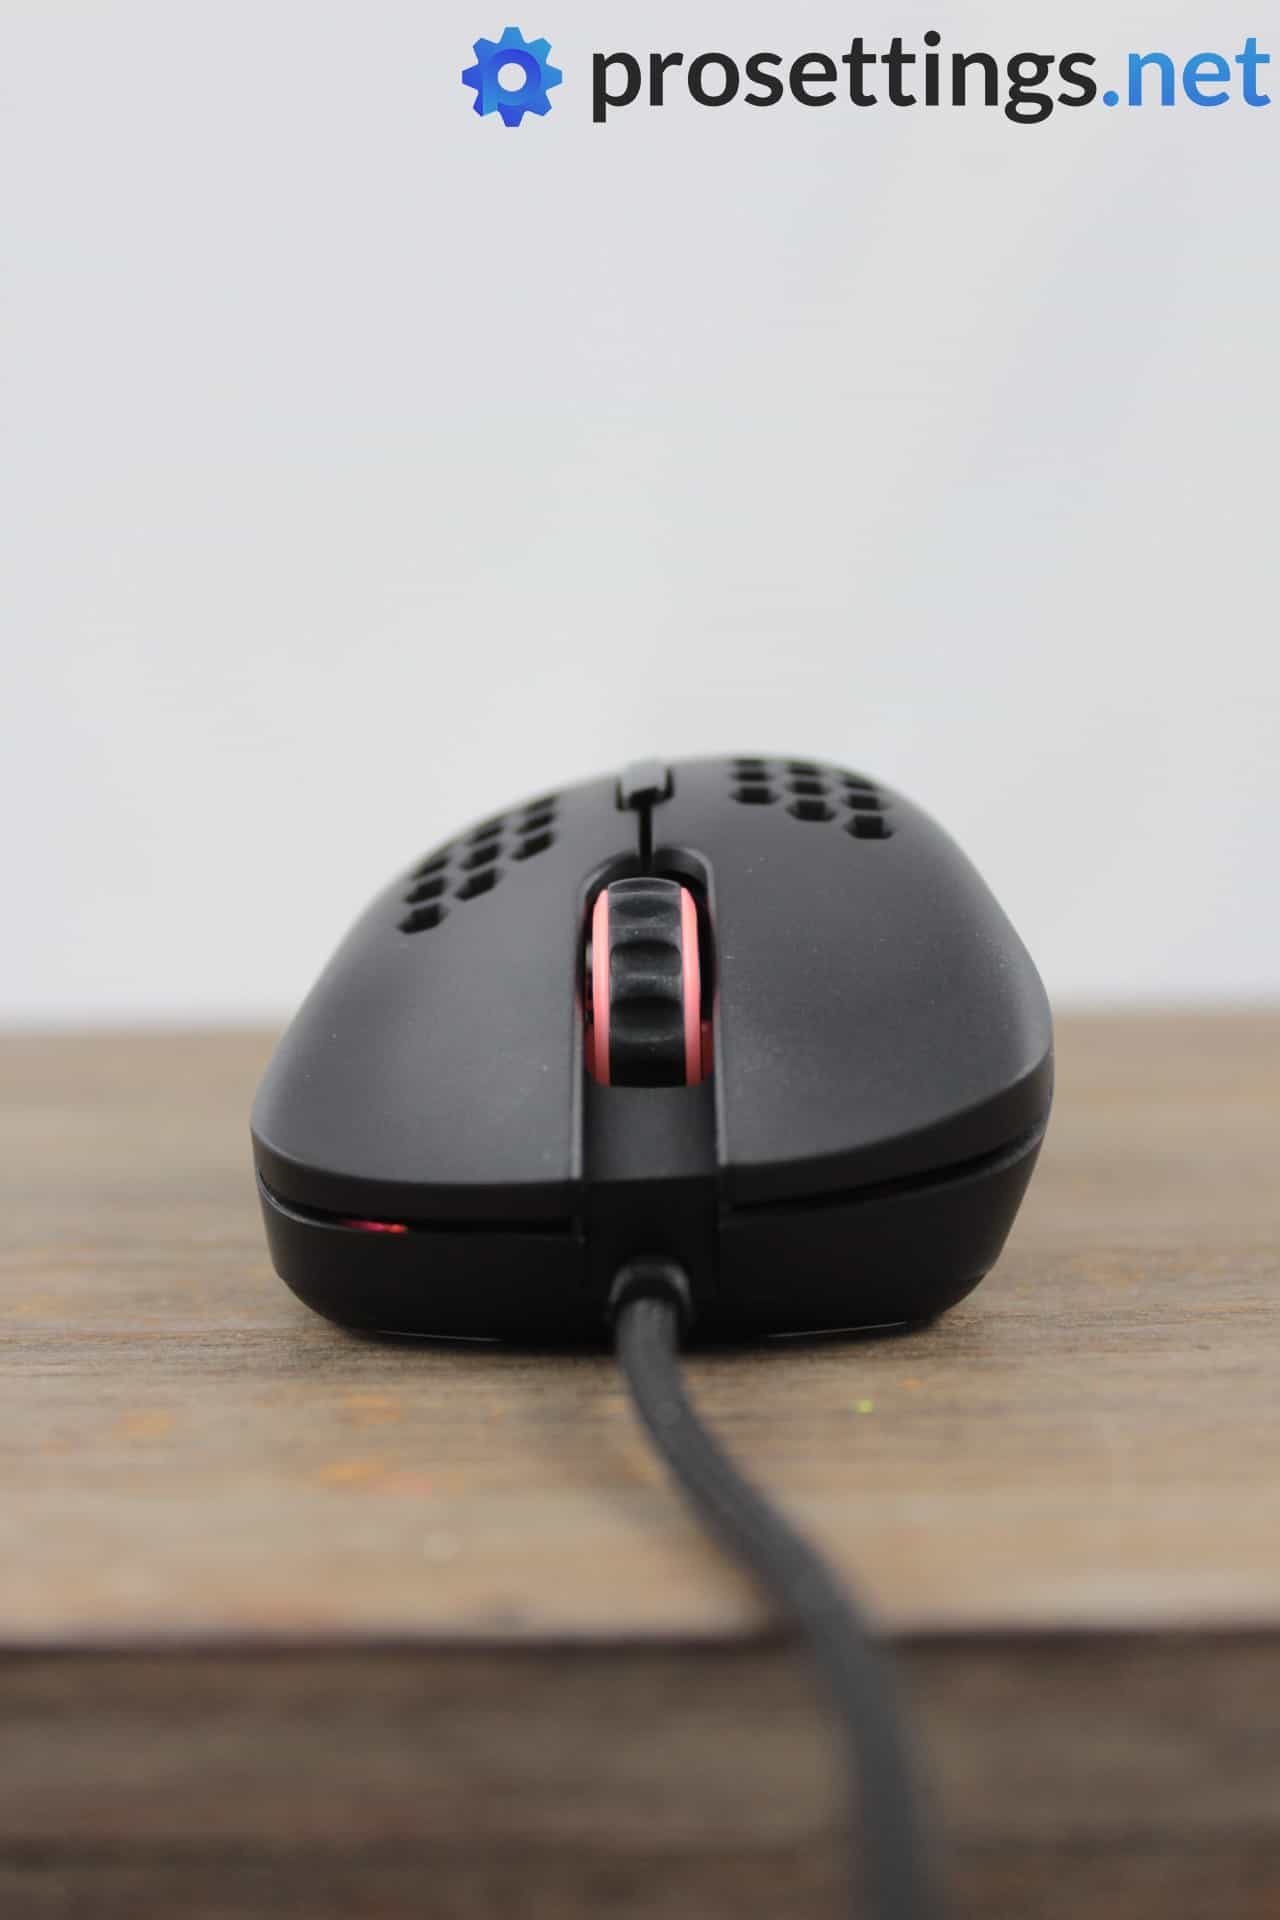 Glorious Model D Mouse Review